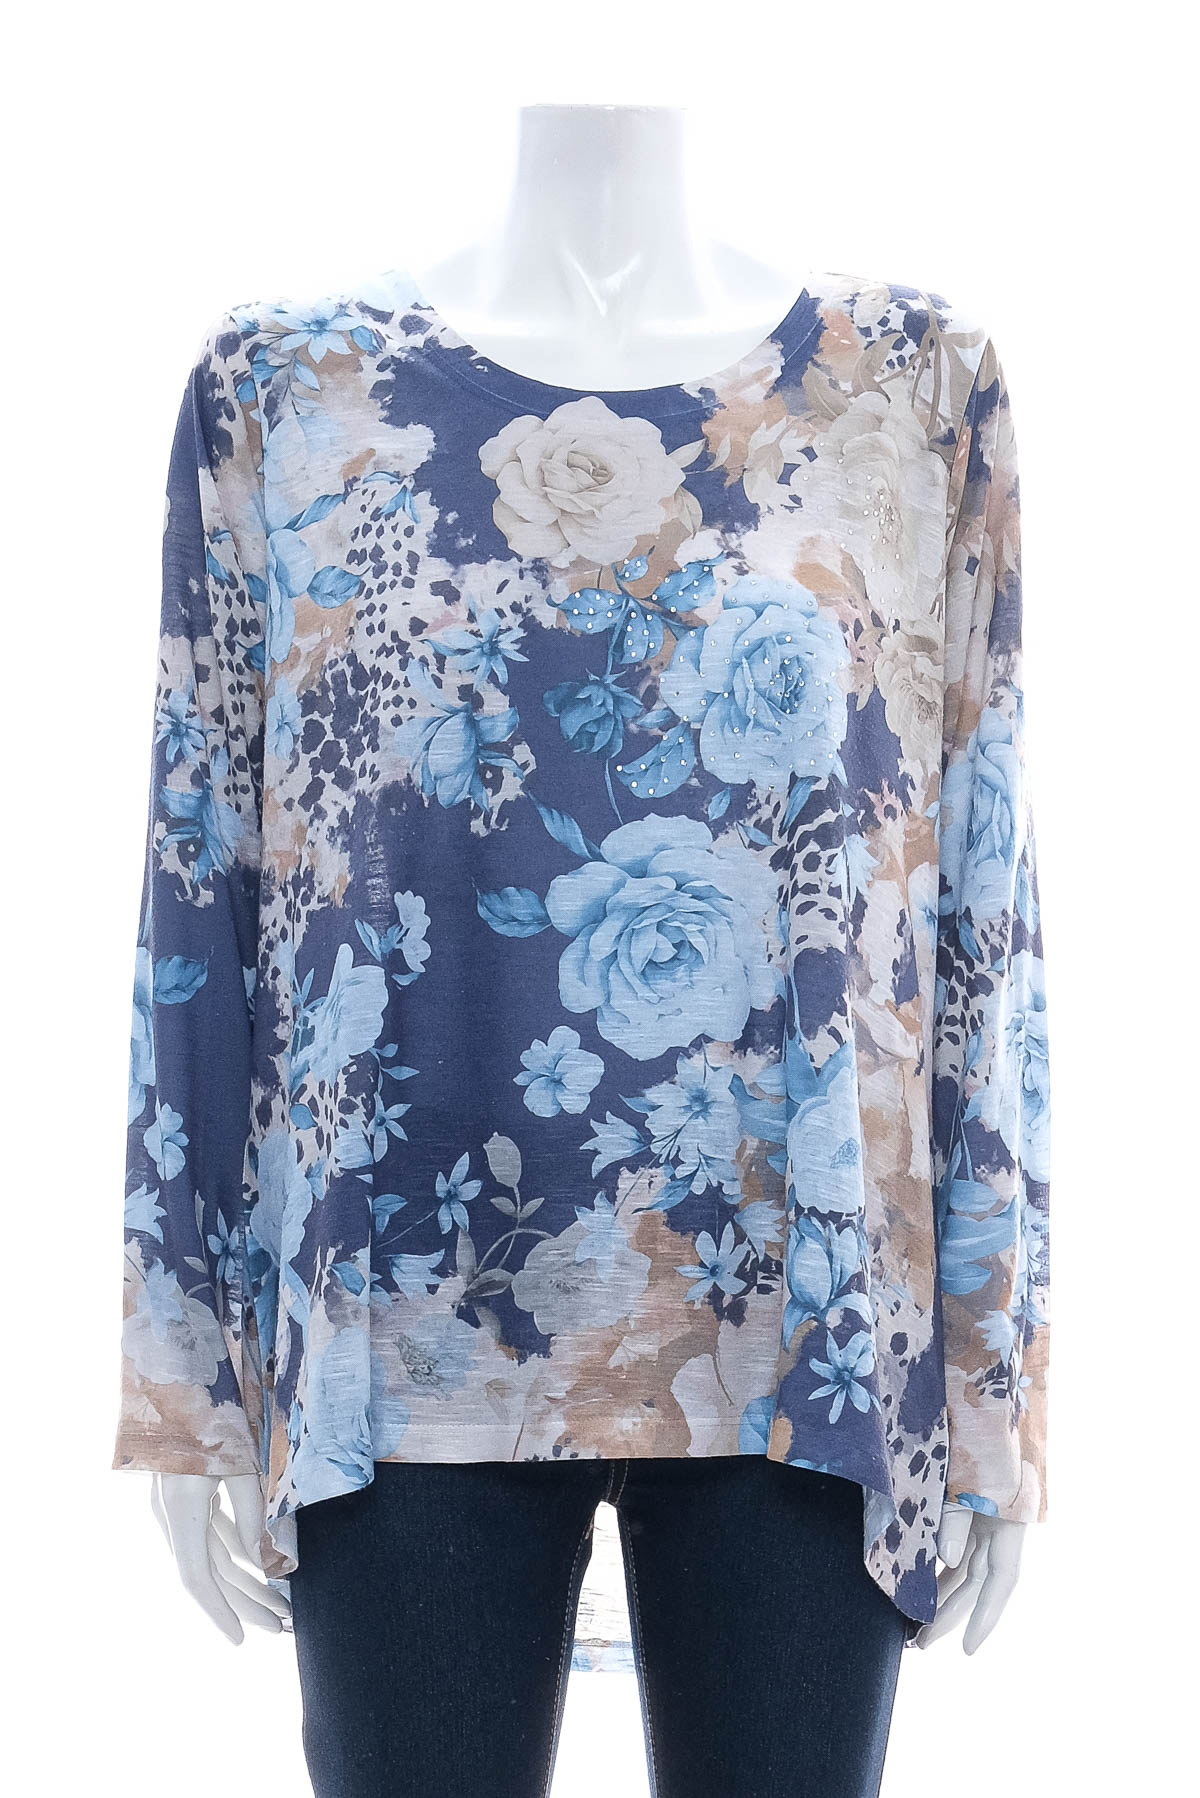 Women's blouse - TIME and TRU - 0